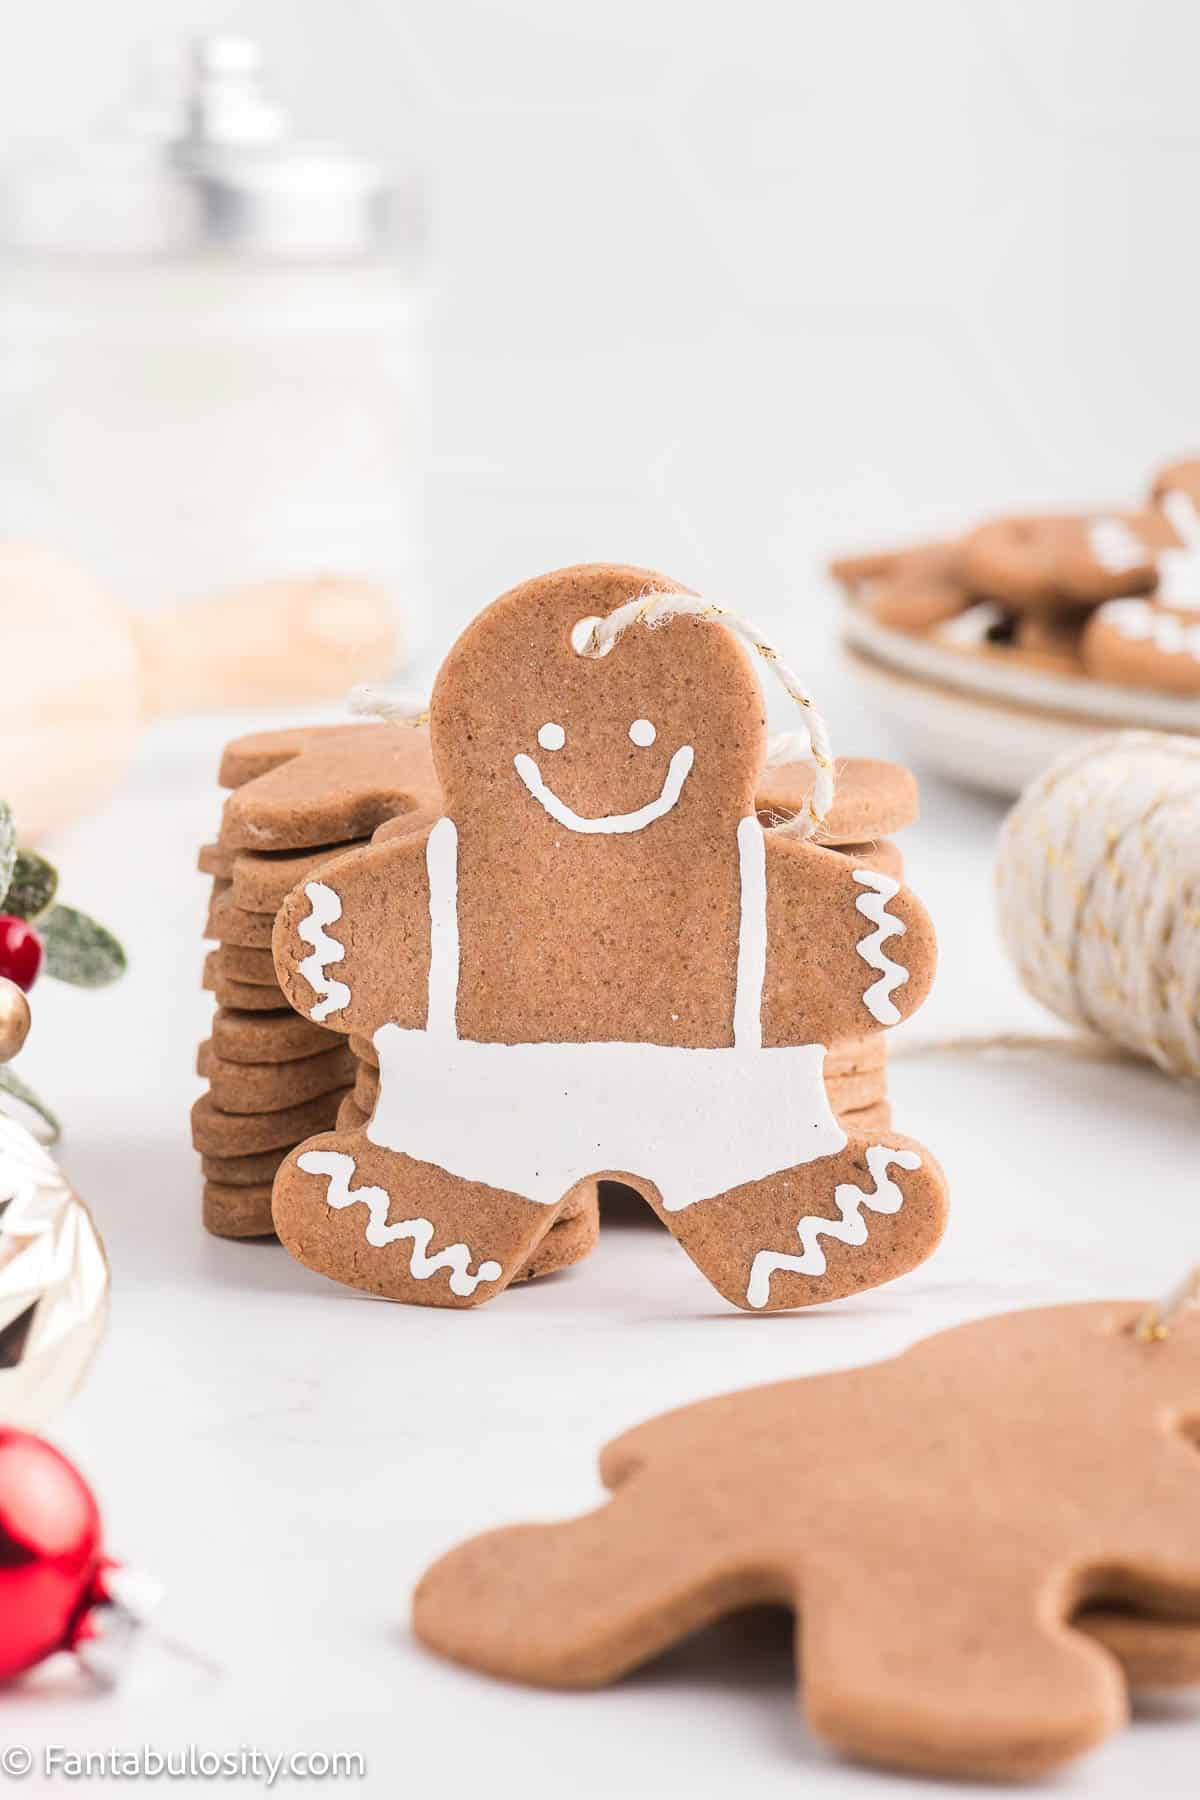 Decorated gingerbread ornament.